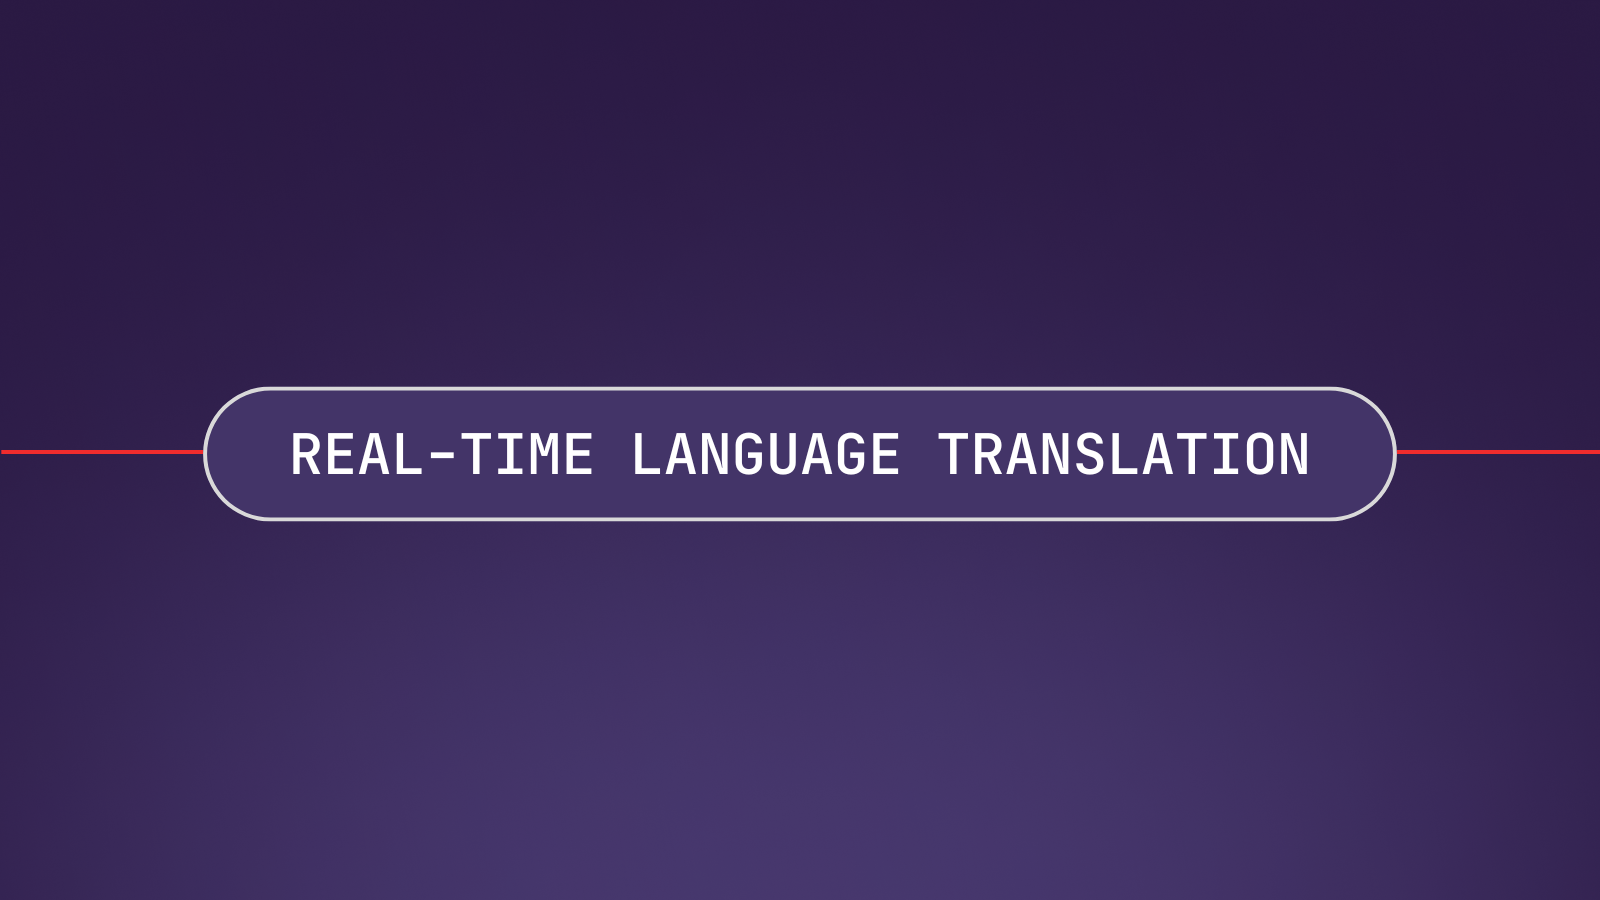 How to Create a Real-Time Language Translation Service with AssemblyAI and DeepL in JavaScript